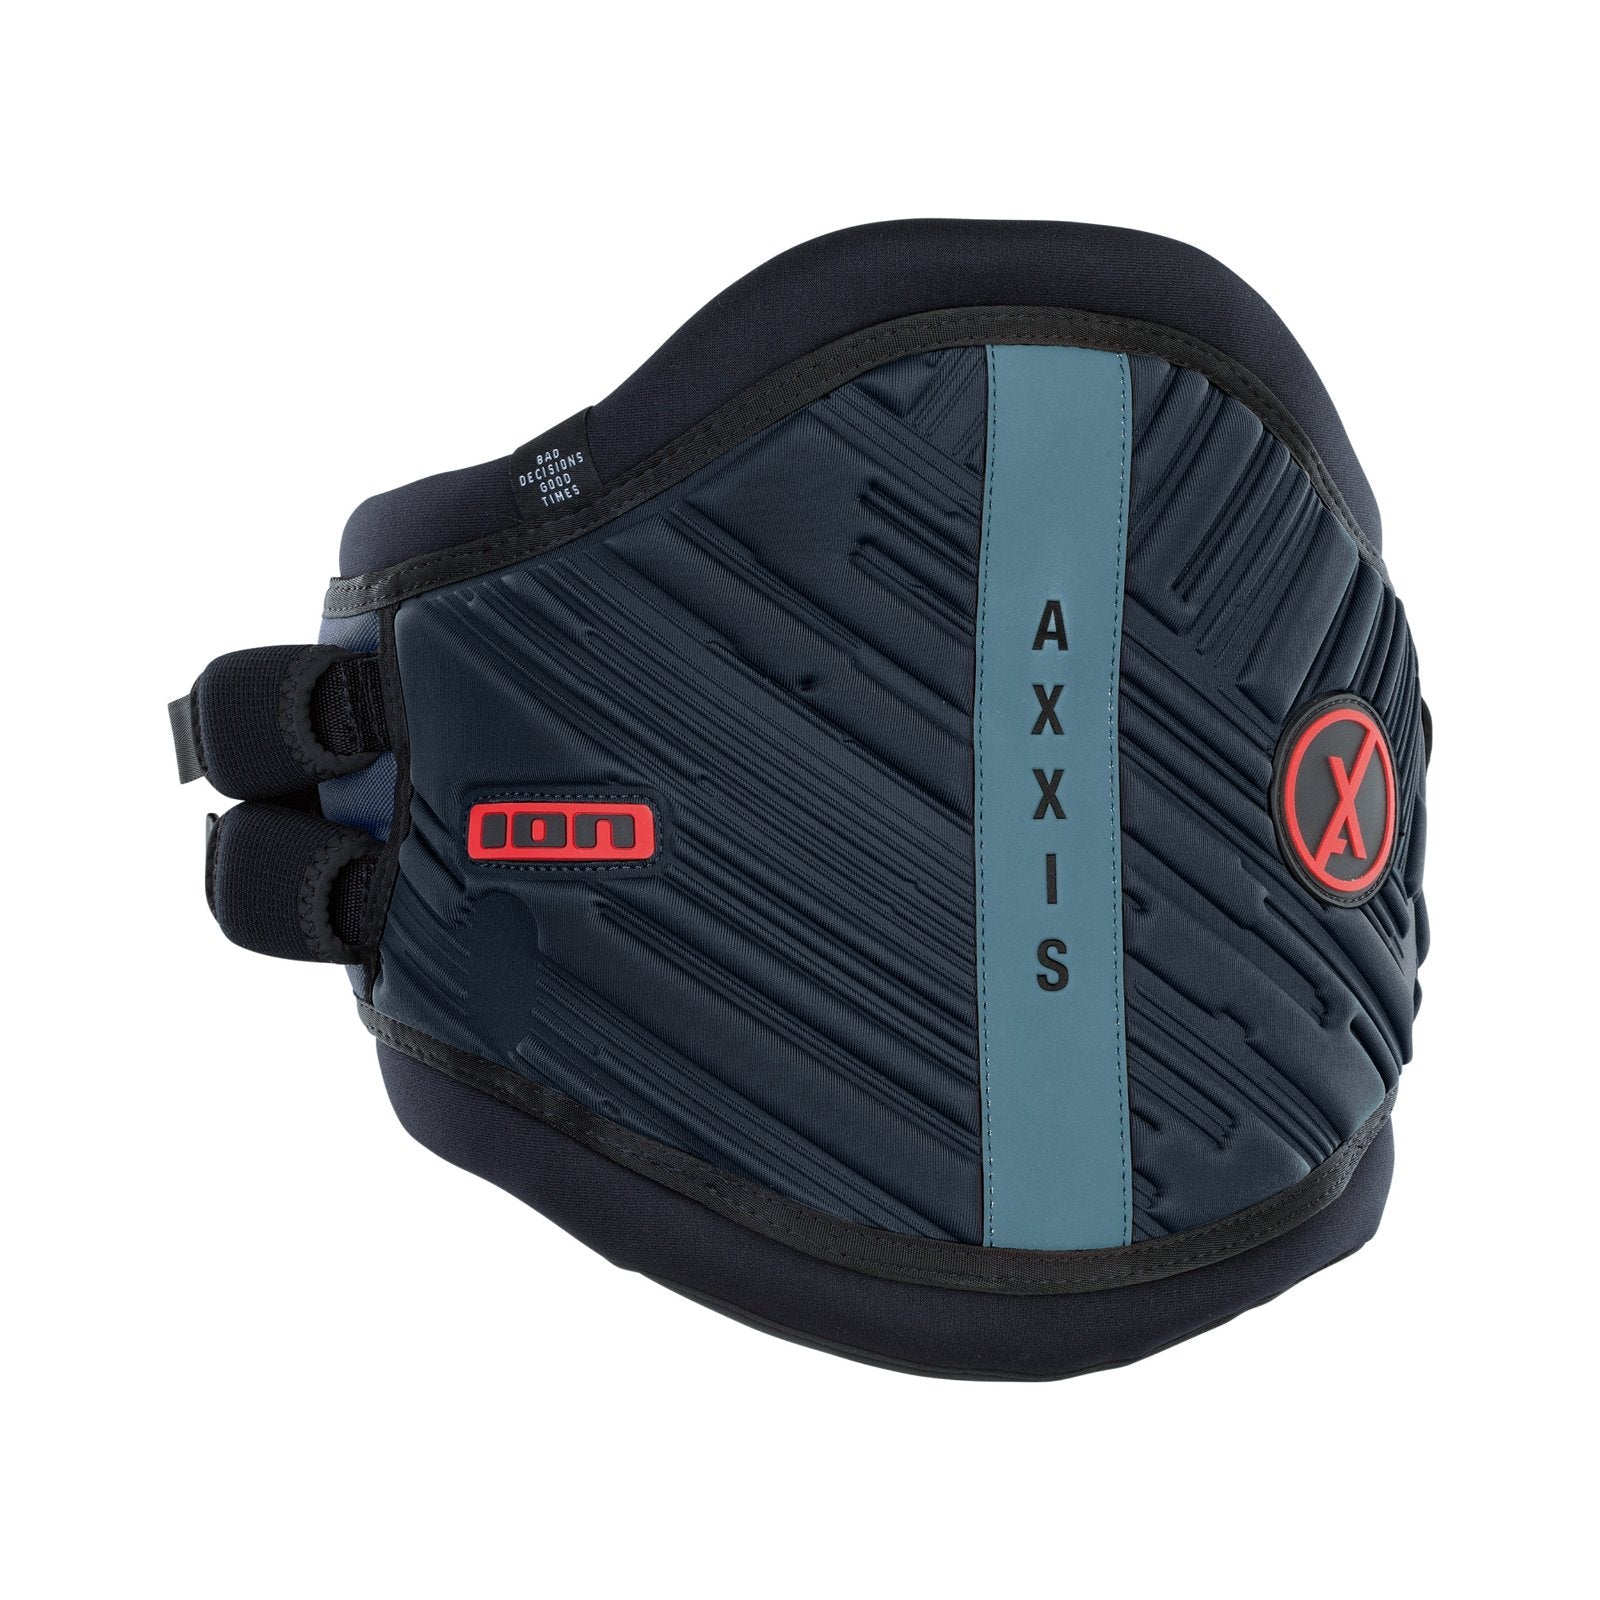 ION Axxis Windsurf 2024-ION Water-L-Black-48212-4734-9008415944385-Surf-store.com